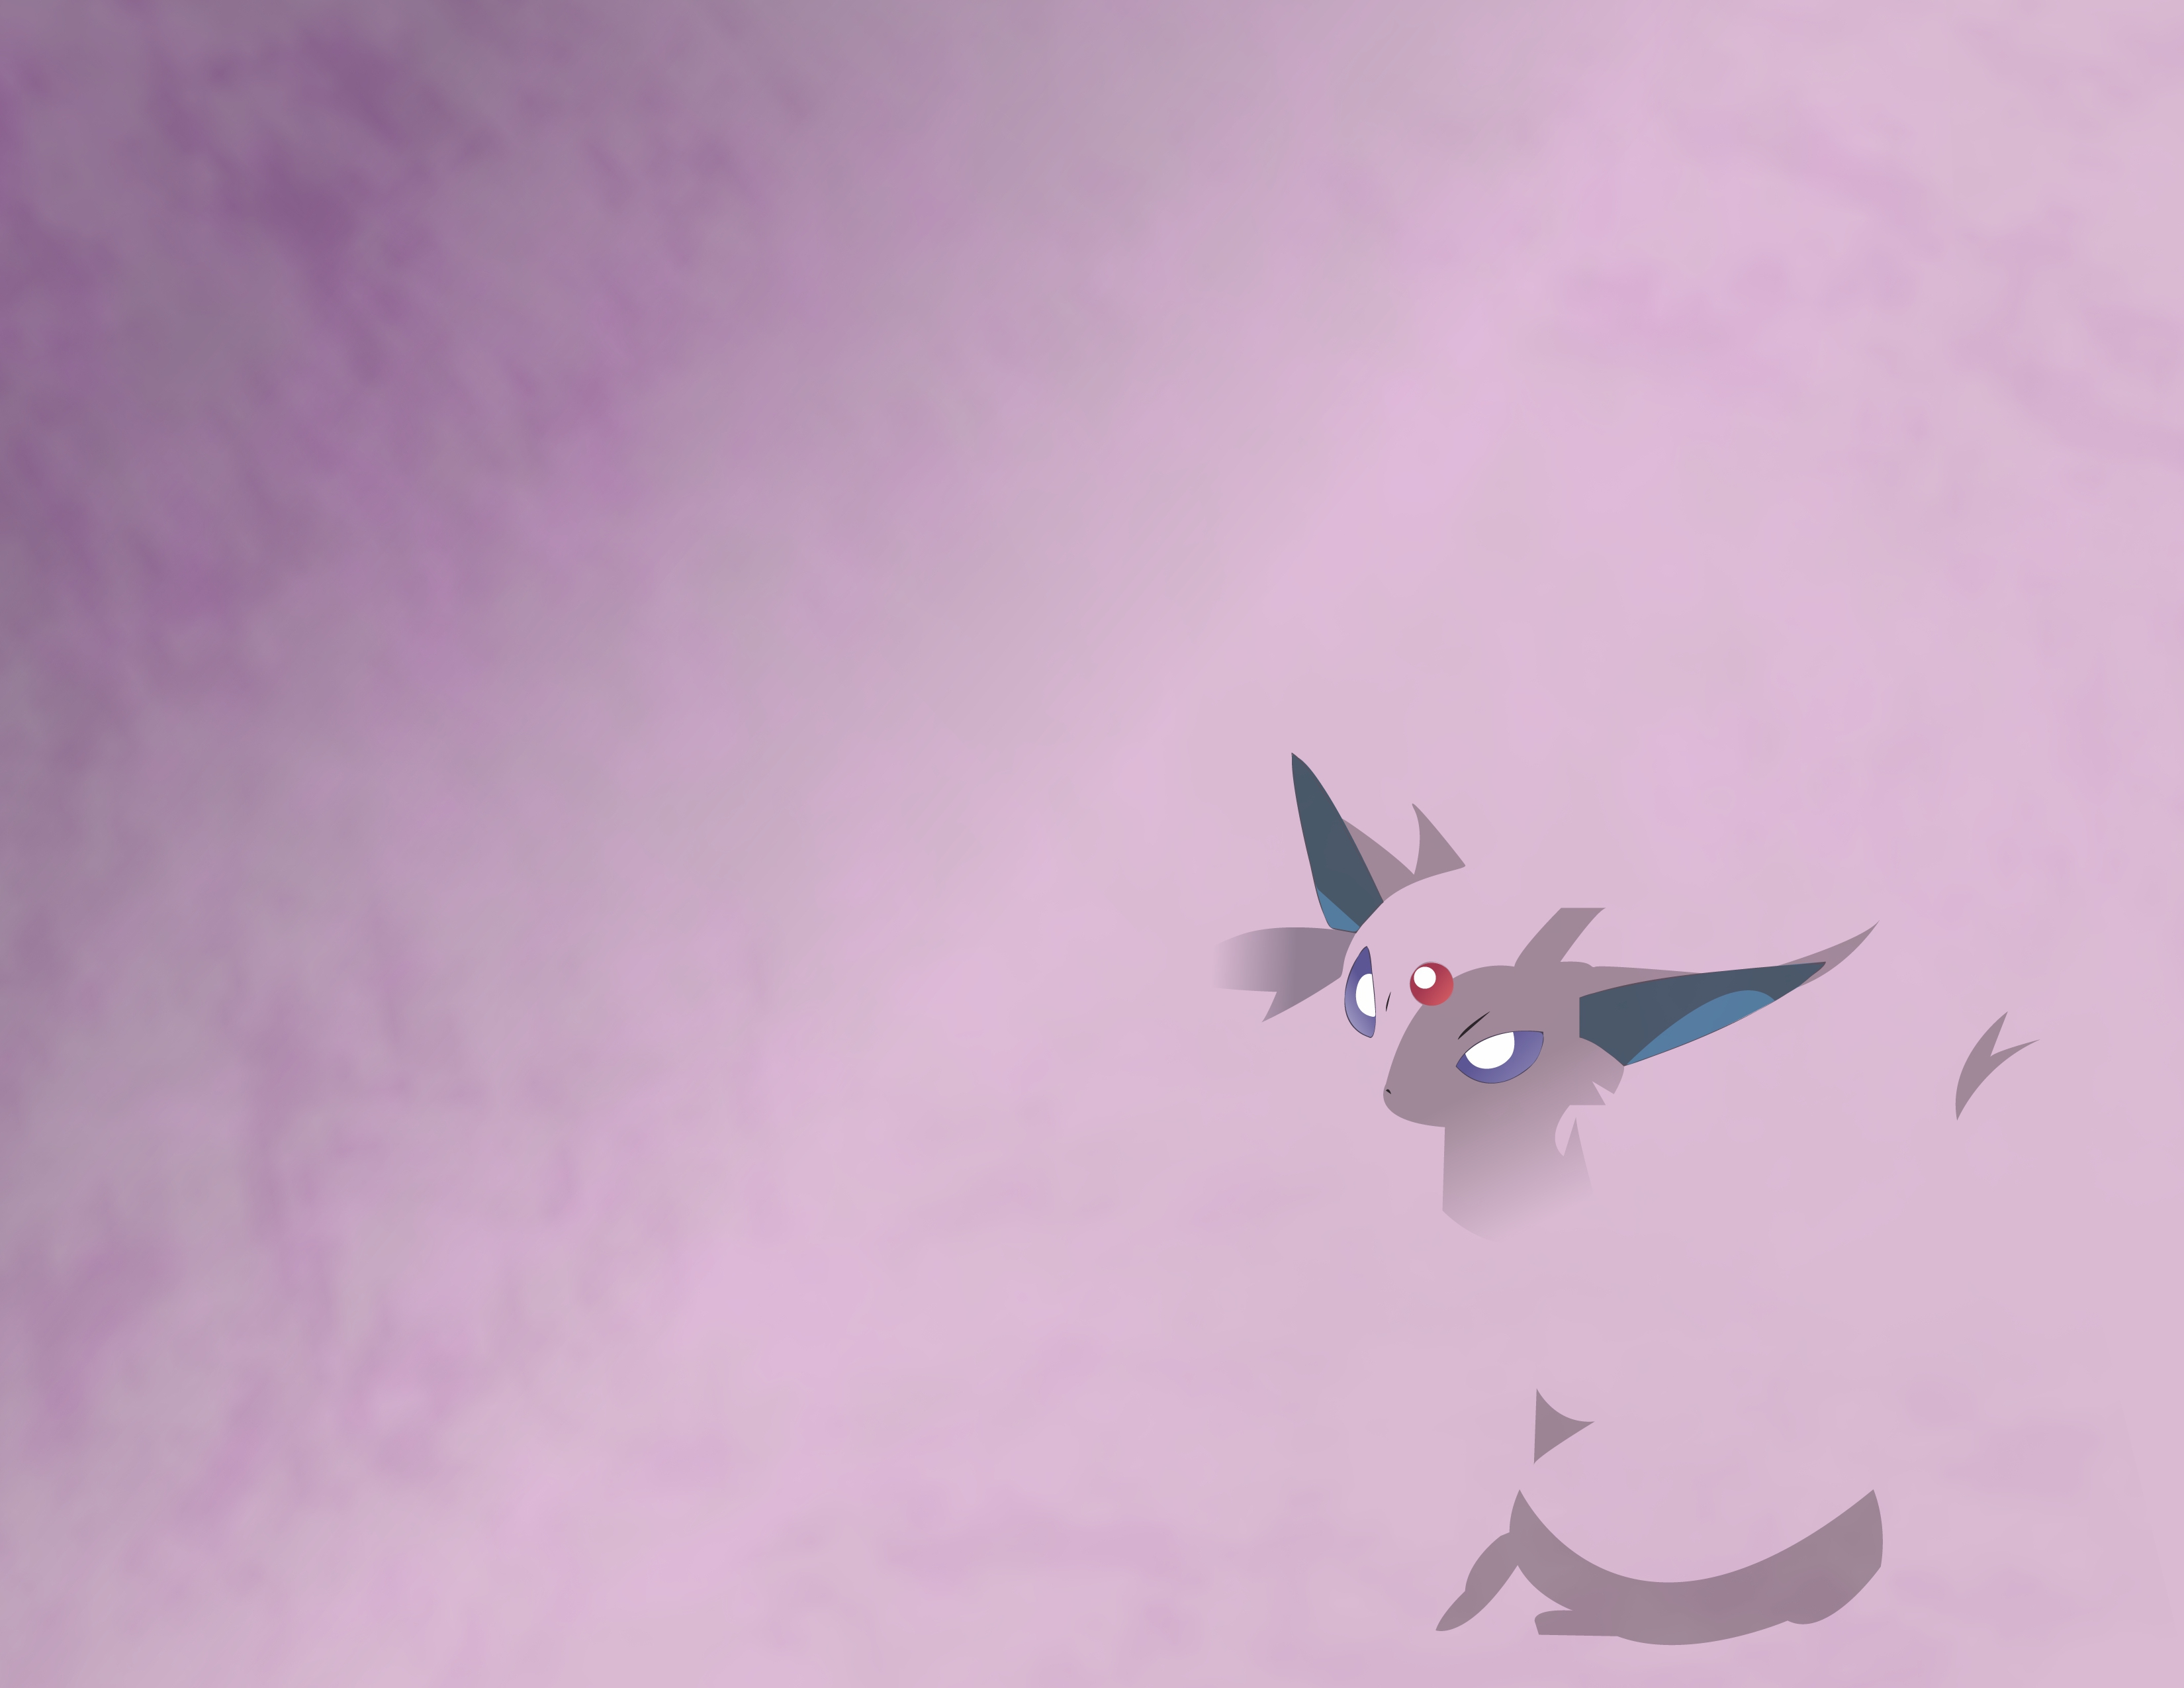 Espeon Wallpaper Image Photos Pictures Background